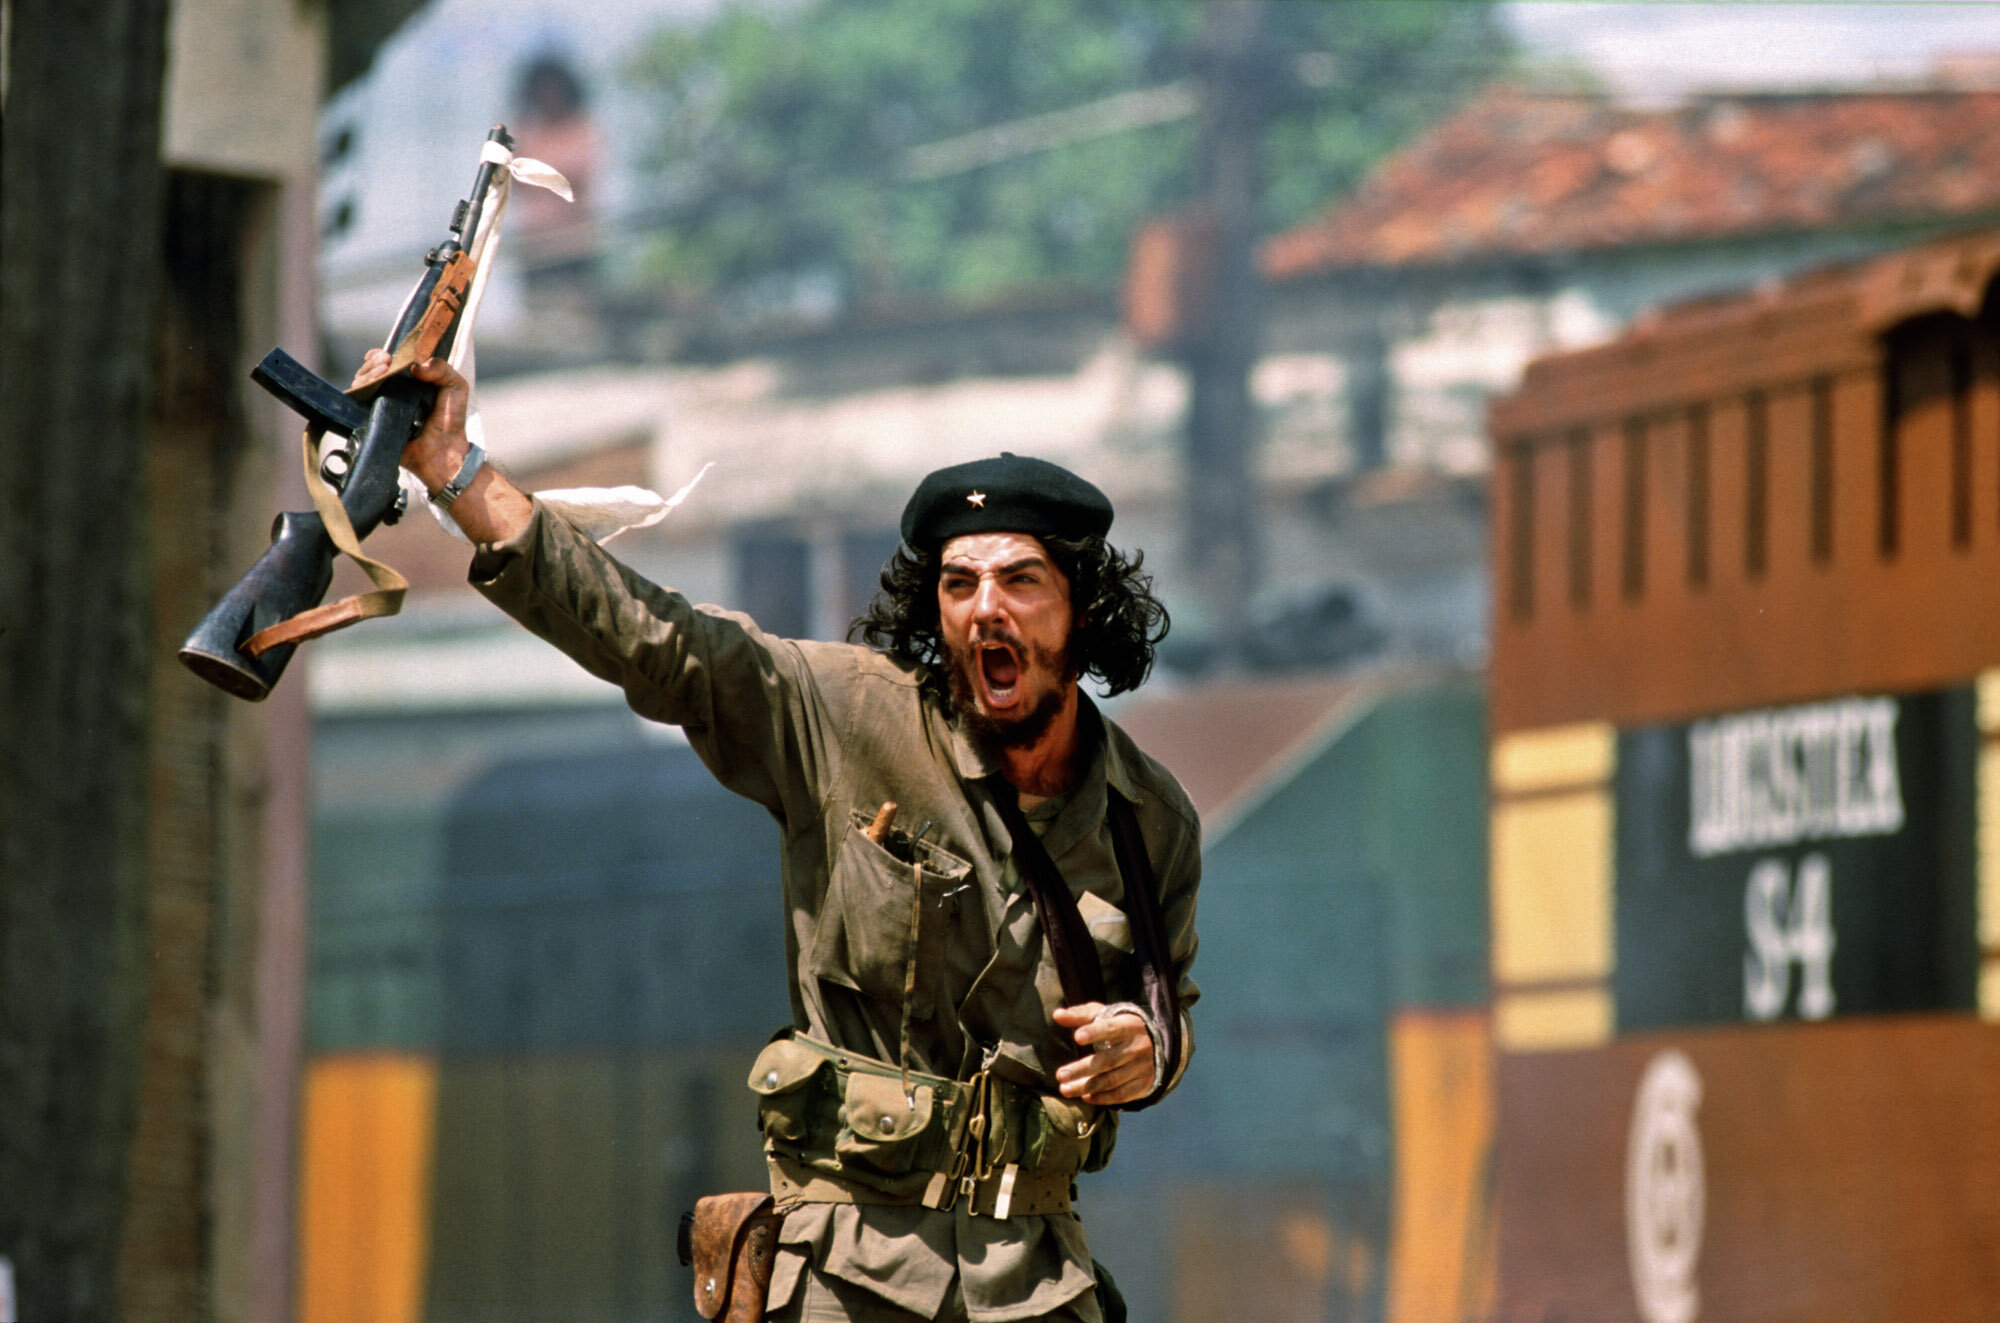  Argentinian actor Alfredo Vasco on the set to "Che", a movie about Ernesto Che Guevara, filmed on location in Santa Clara in 1997, where Che assaulted a train of Batista's Armed Forces in December of 1958, which finally led to Bastista's escape from